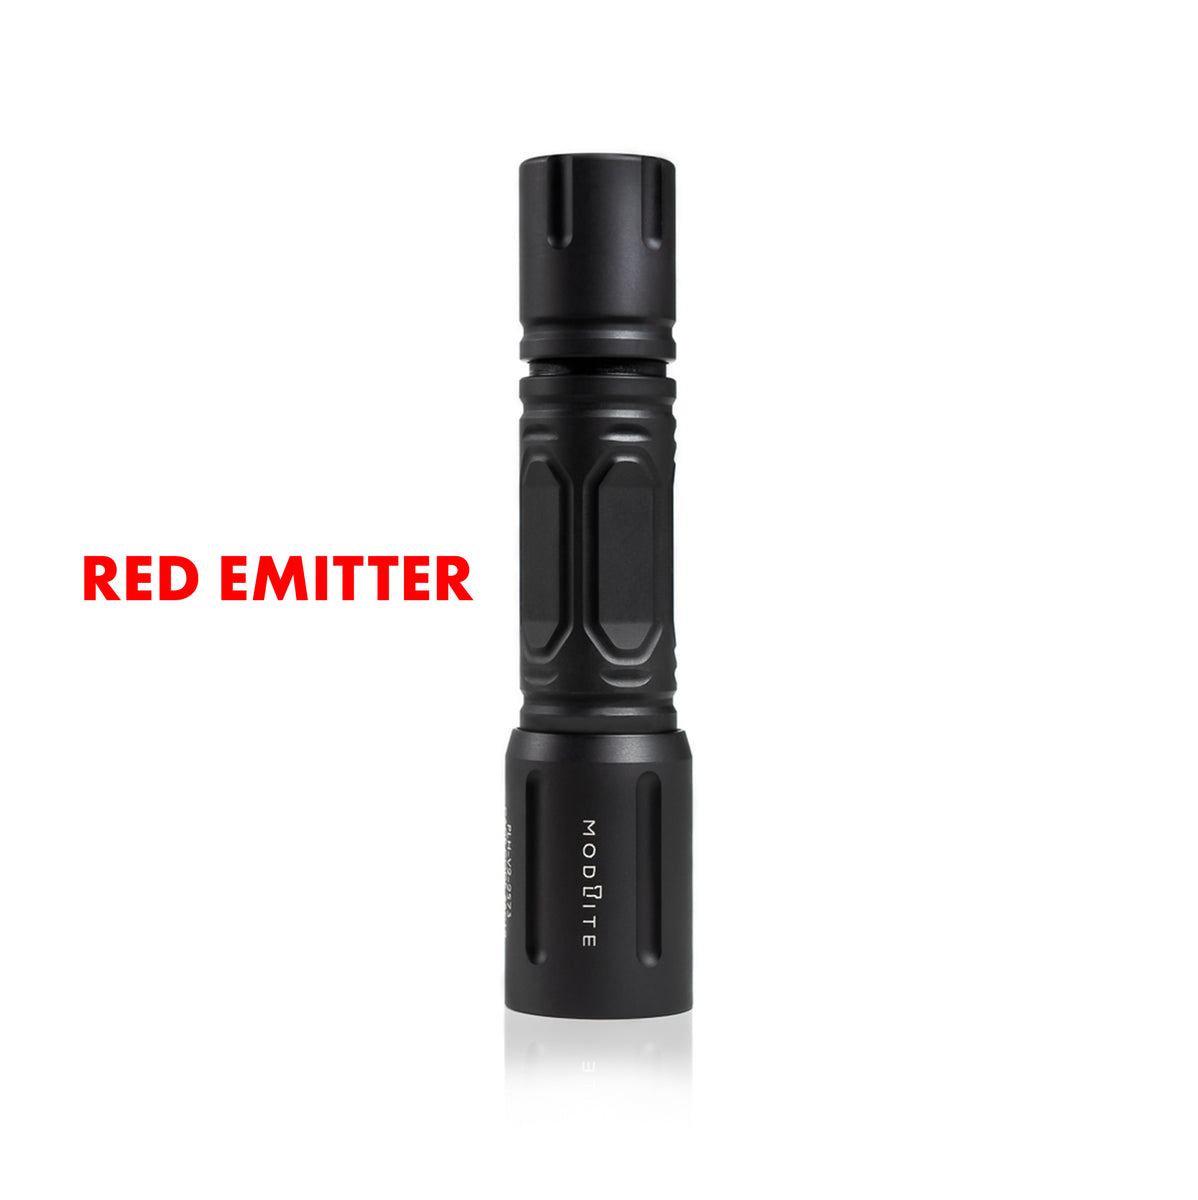 Modlite Handheld RED-18650 Light Package – Modlite Systems